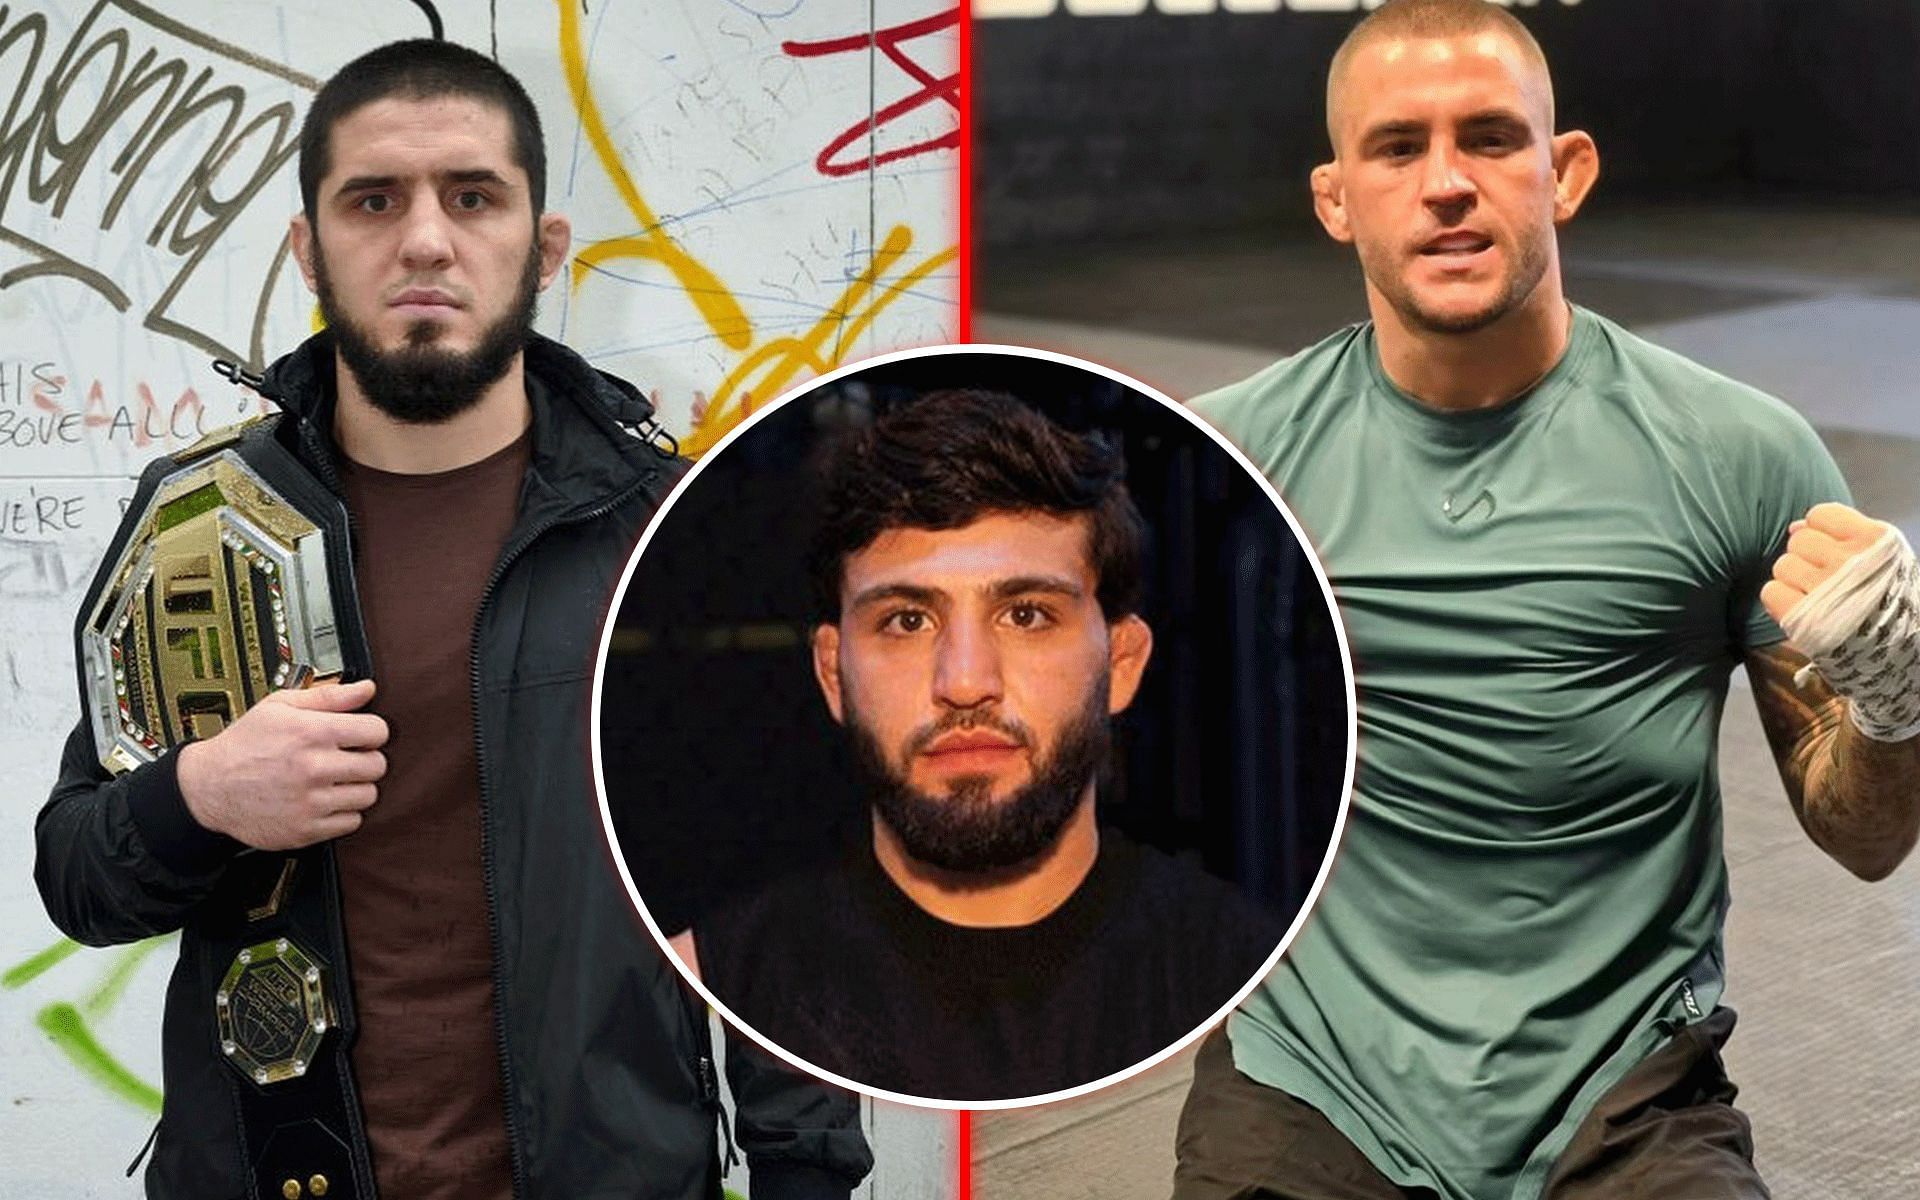 Islam Makhachev (left), Arman Tsarukyan (middle), and Dustin Poirier (right) are counted among the most elite lightweights in MMA today [Images courtesy: @islam_makhachev, @arm_011, and @dustinpoirier on Instagram]